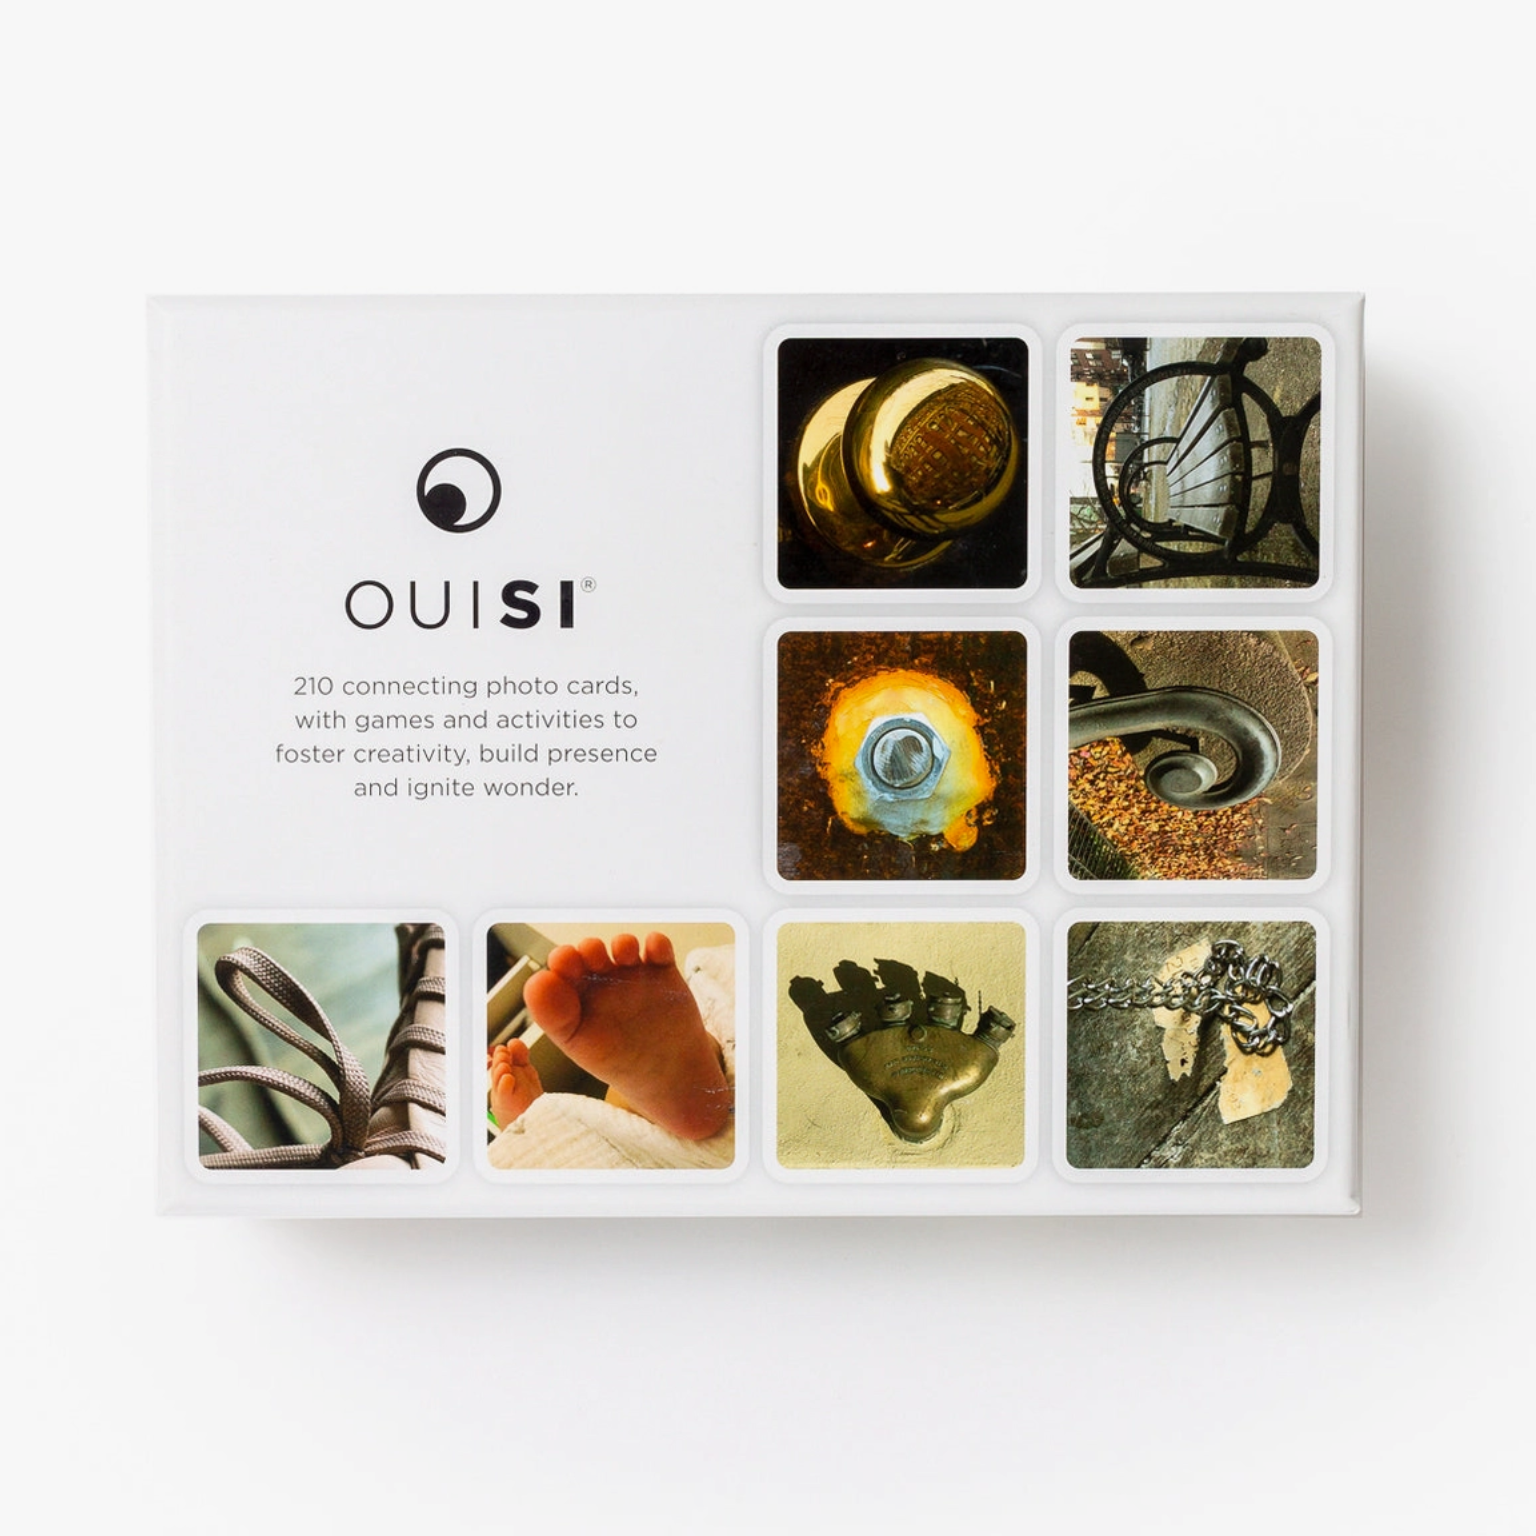 The OuiSi Original game is a set of 210 Visually Connecting Photo Cards that celebrate the beauty of everyday life.